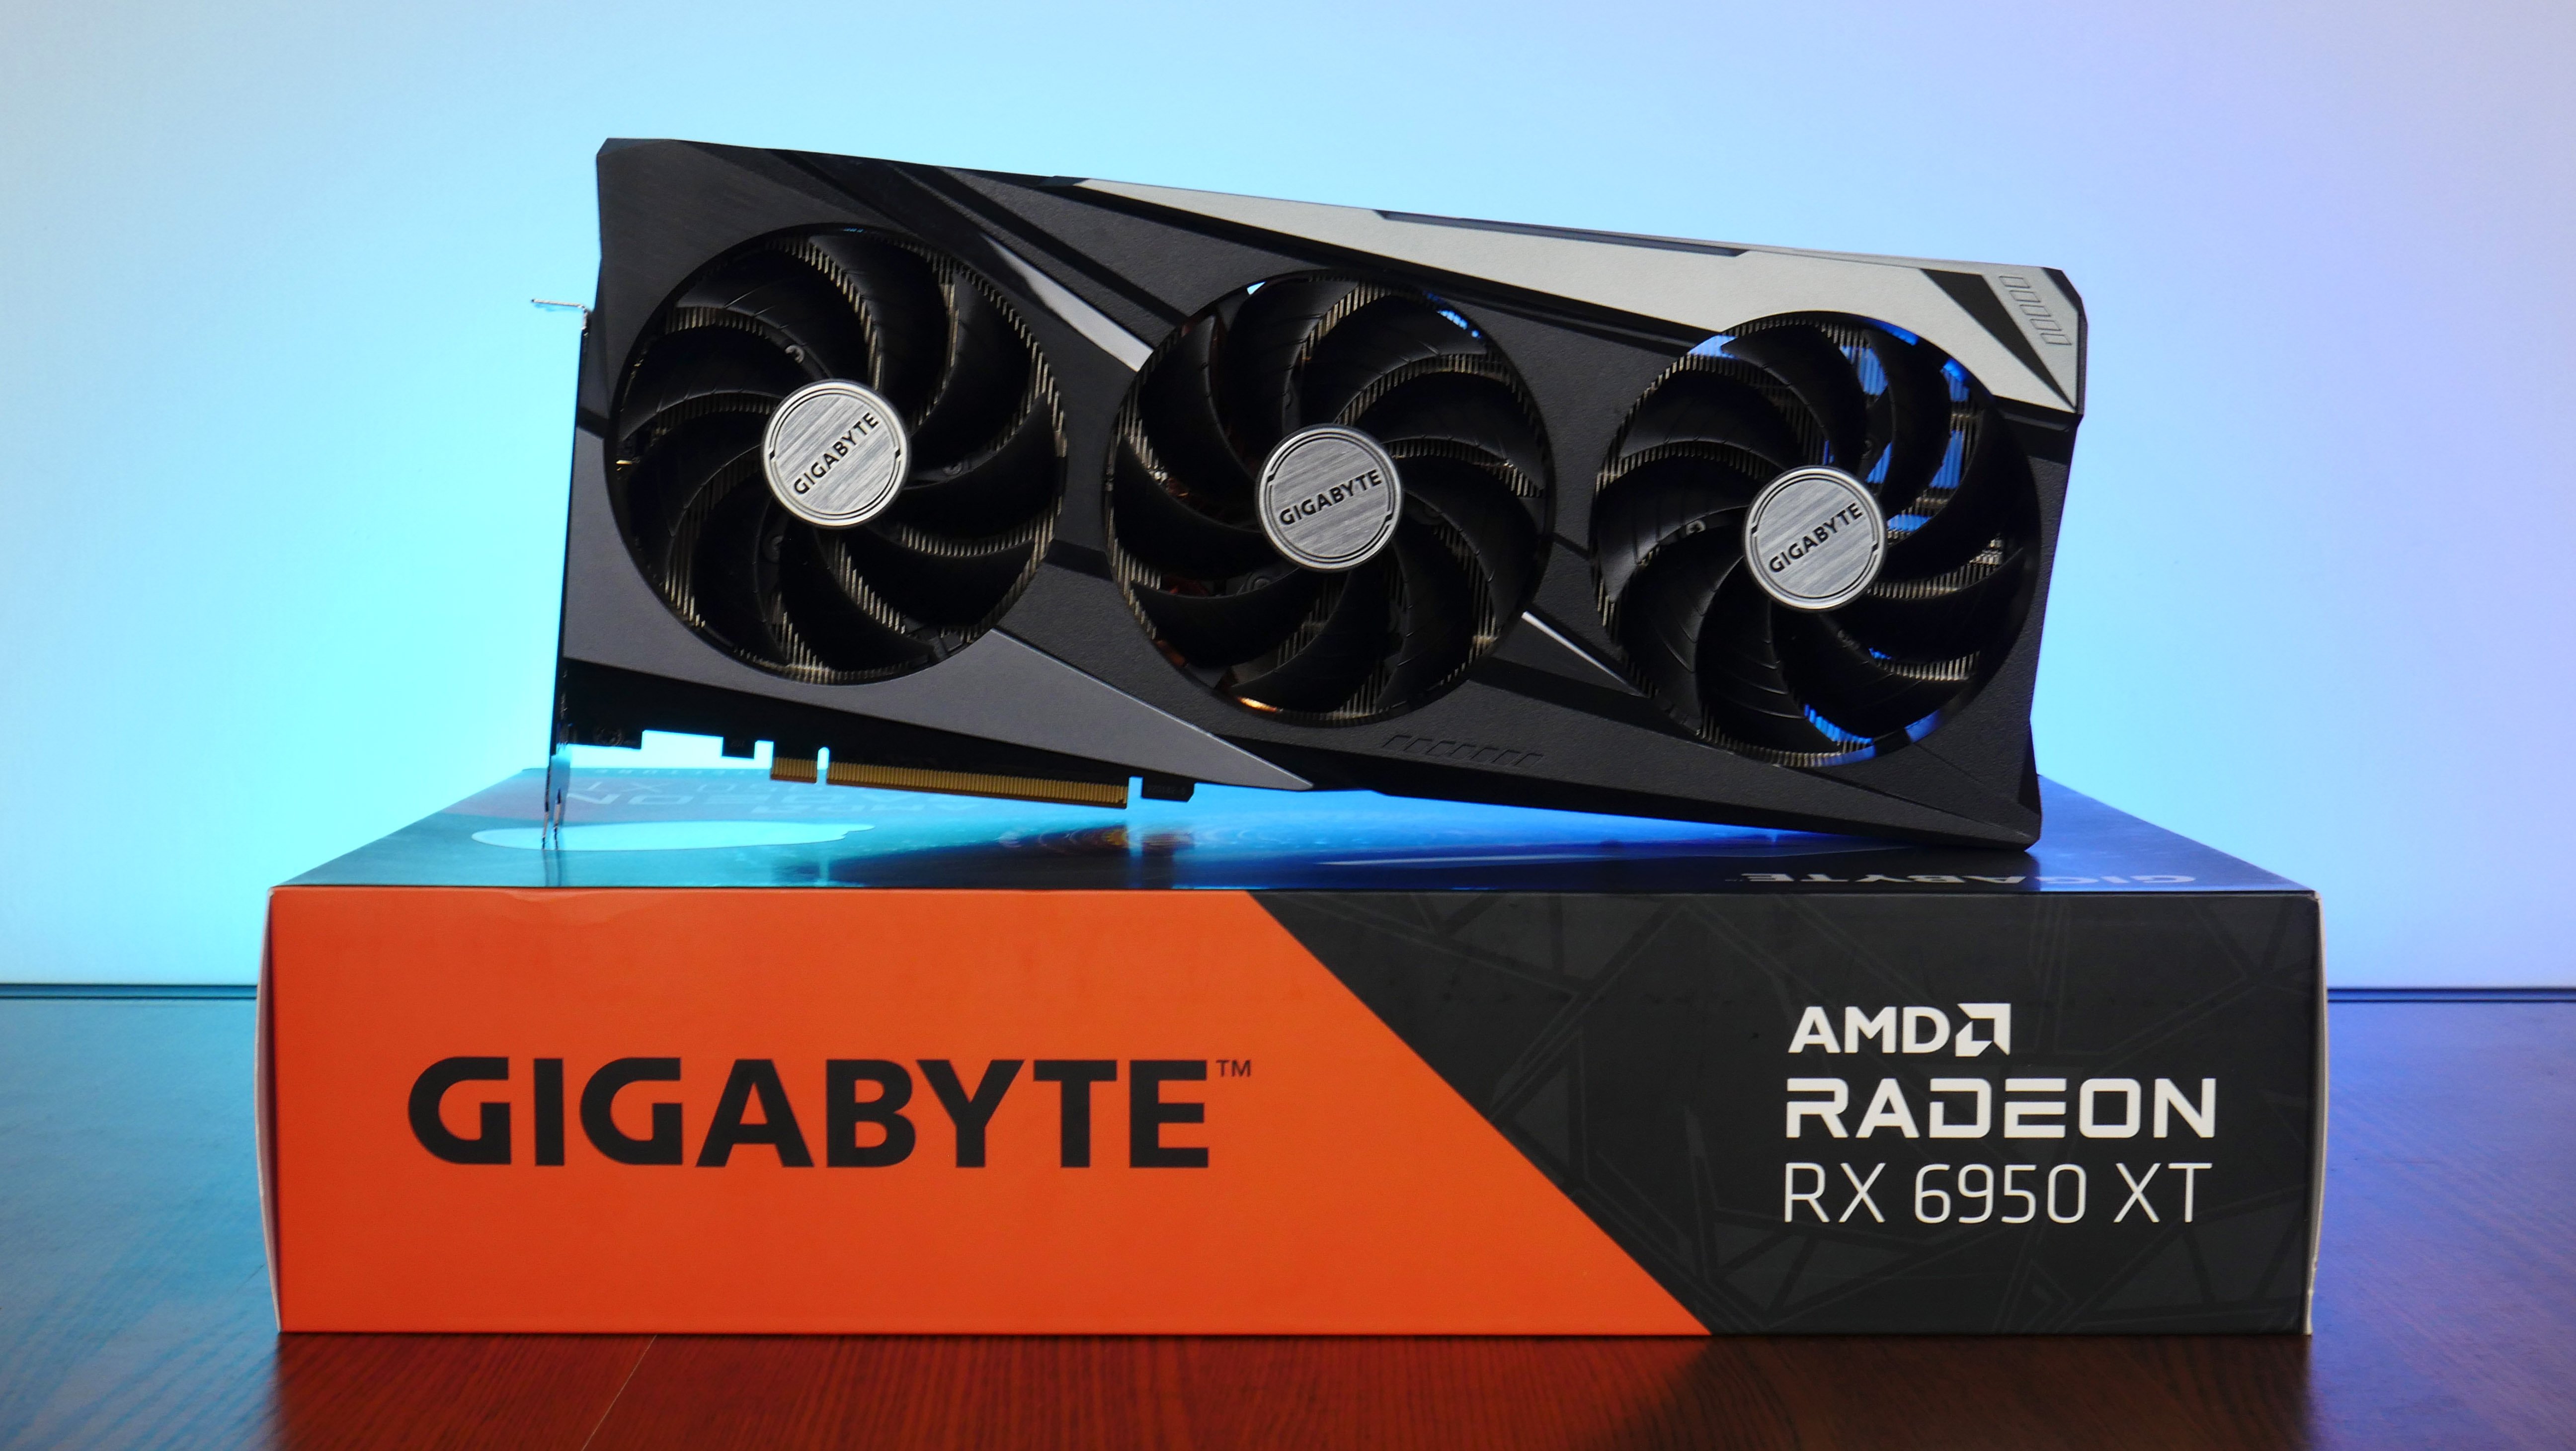 Gigabyte Radeon RX 6950 XT GAMING OC 16G Graphics Card - Unboxed